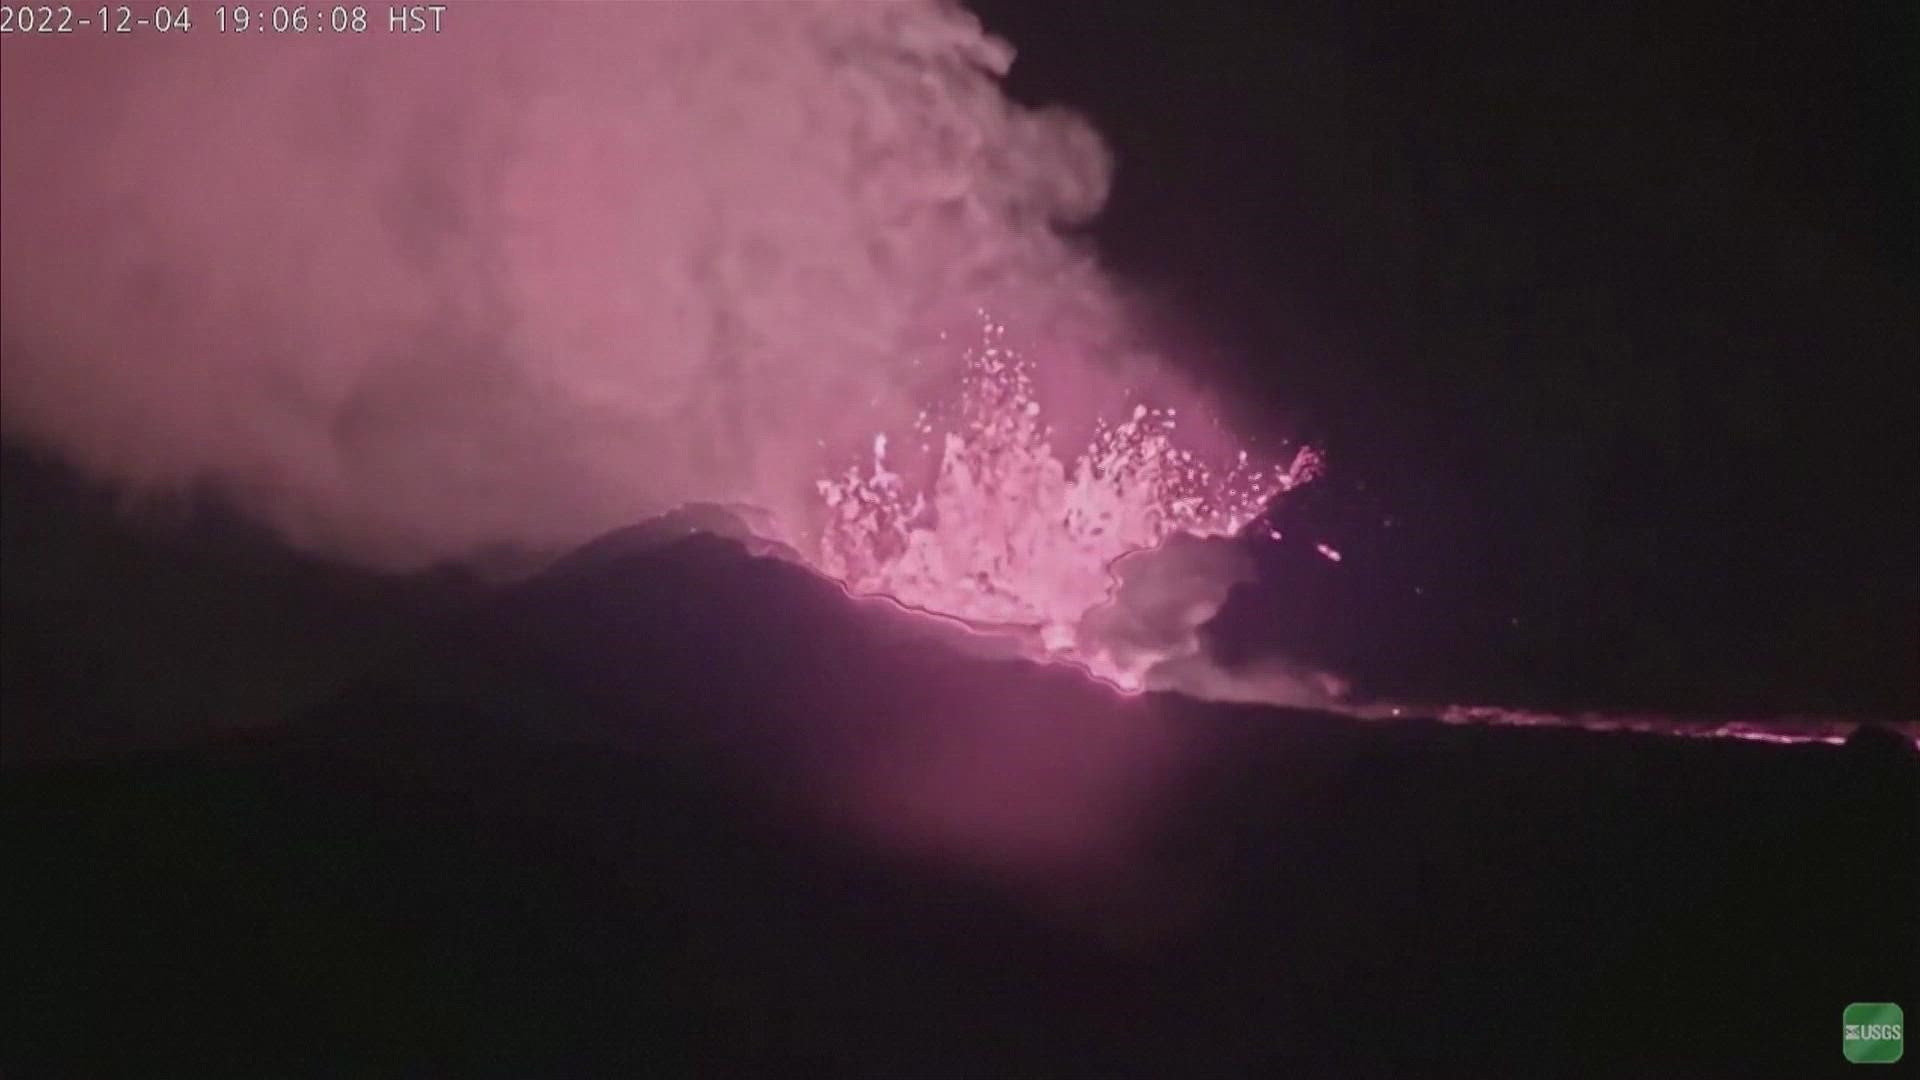 The last time this volcano in Hawaii erupted was in 1984!